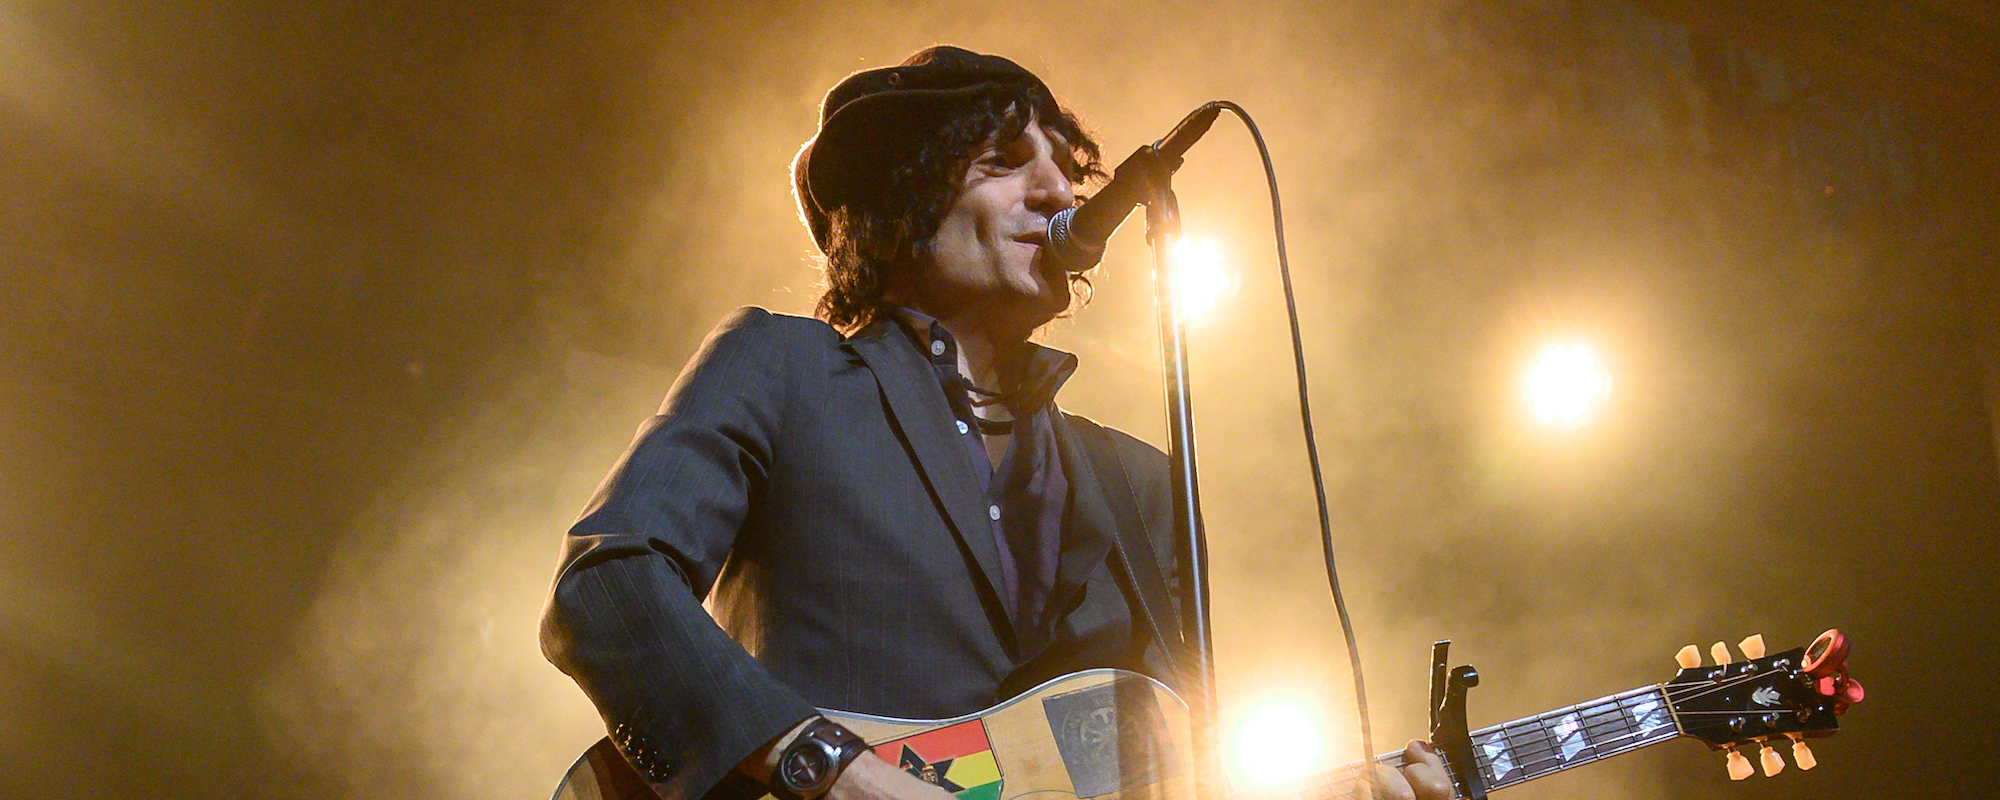 Jesse Malin Shares Health Update, New Music Video, and Partnership with Joey Ramone Estate to Support His Treatment